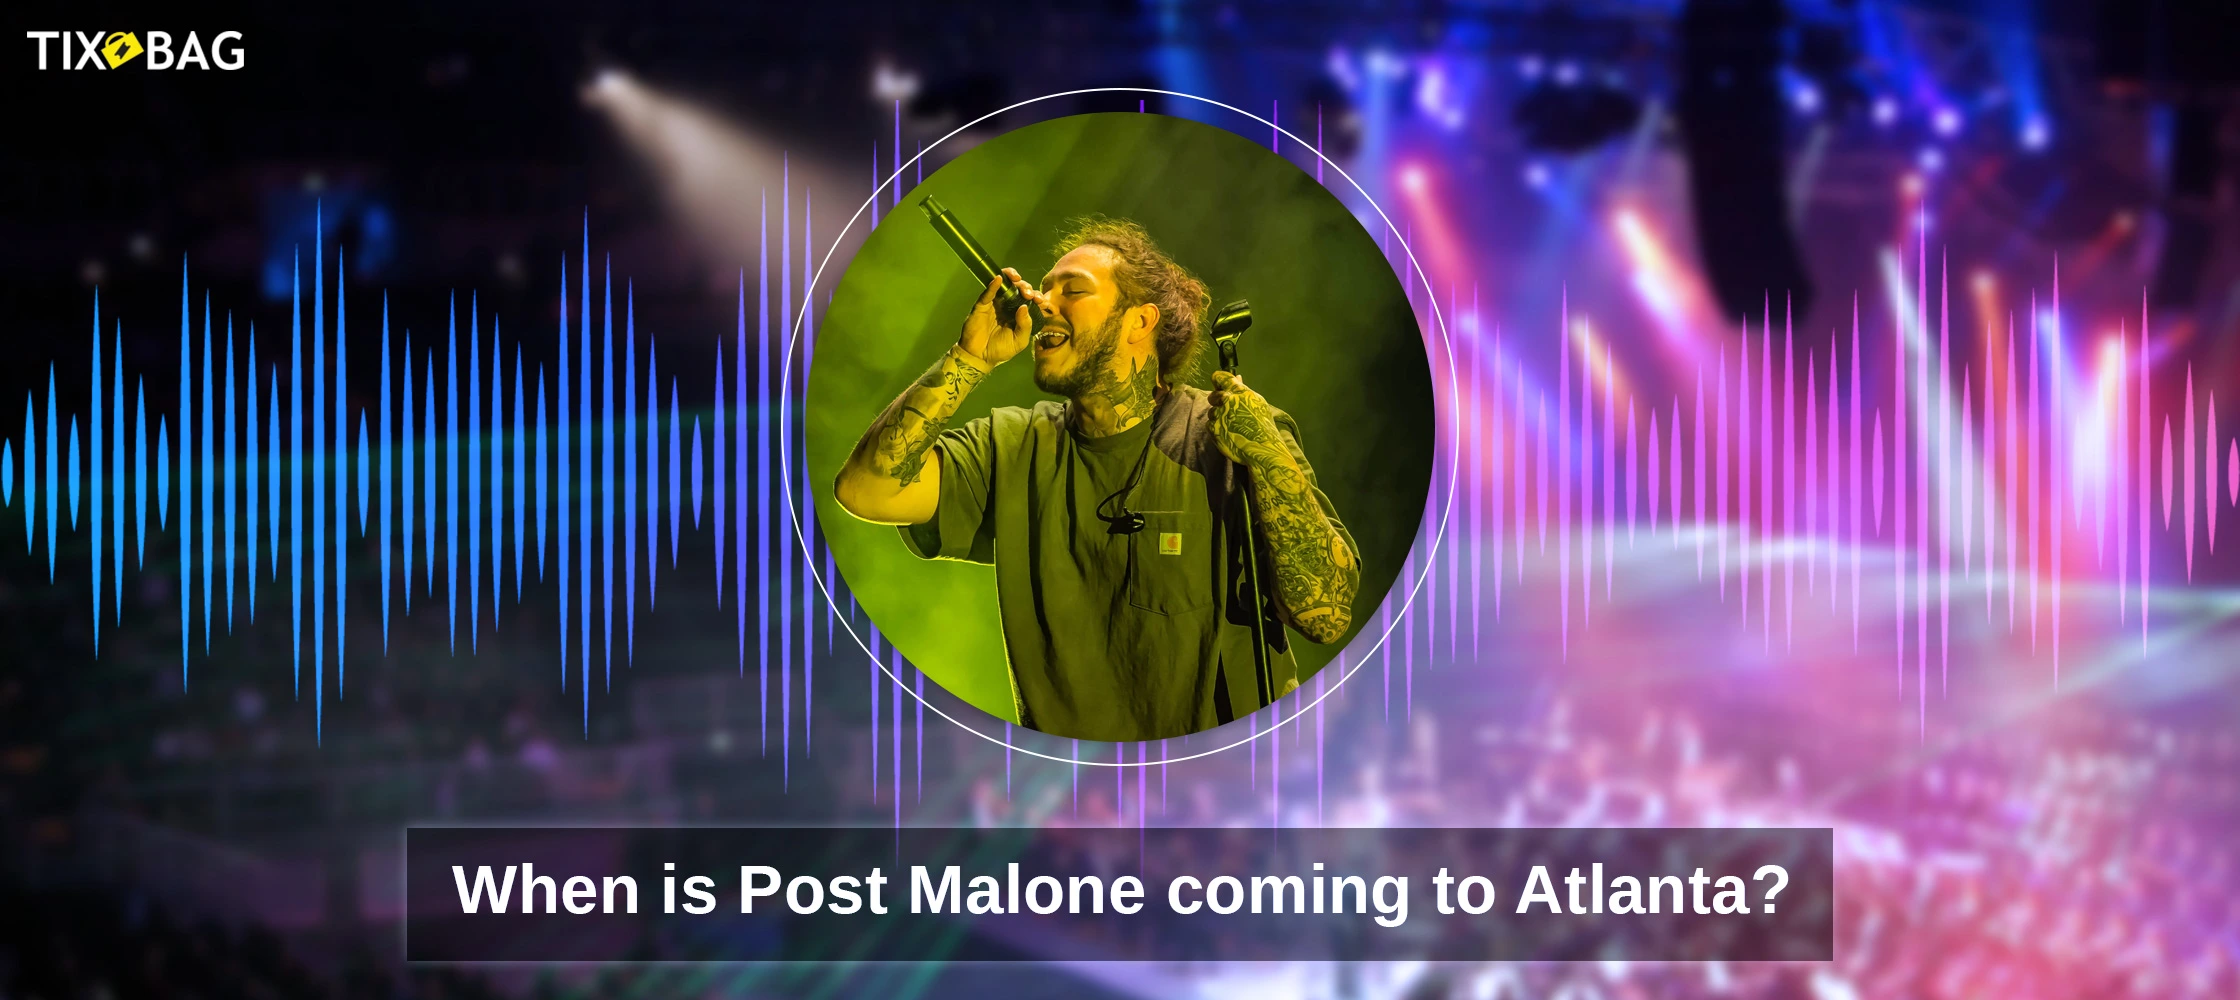 When is Post Malone coming to Atlanta?